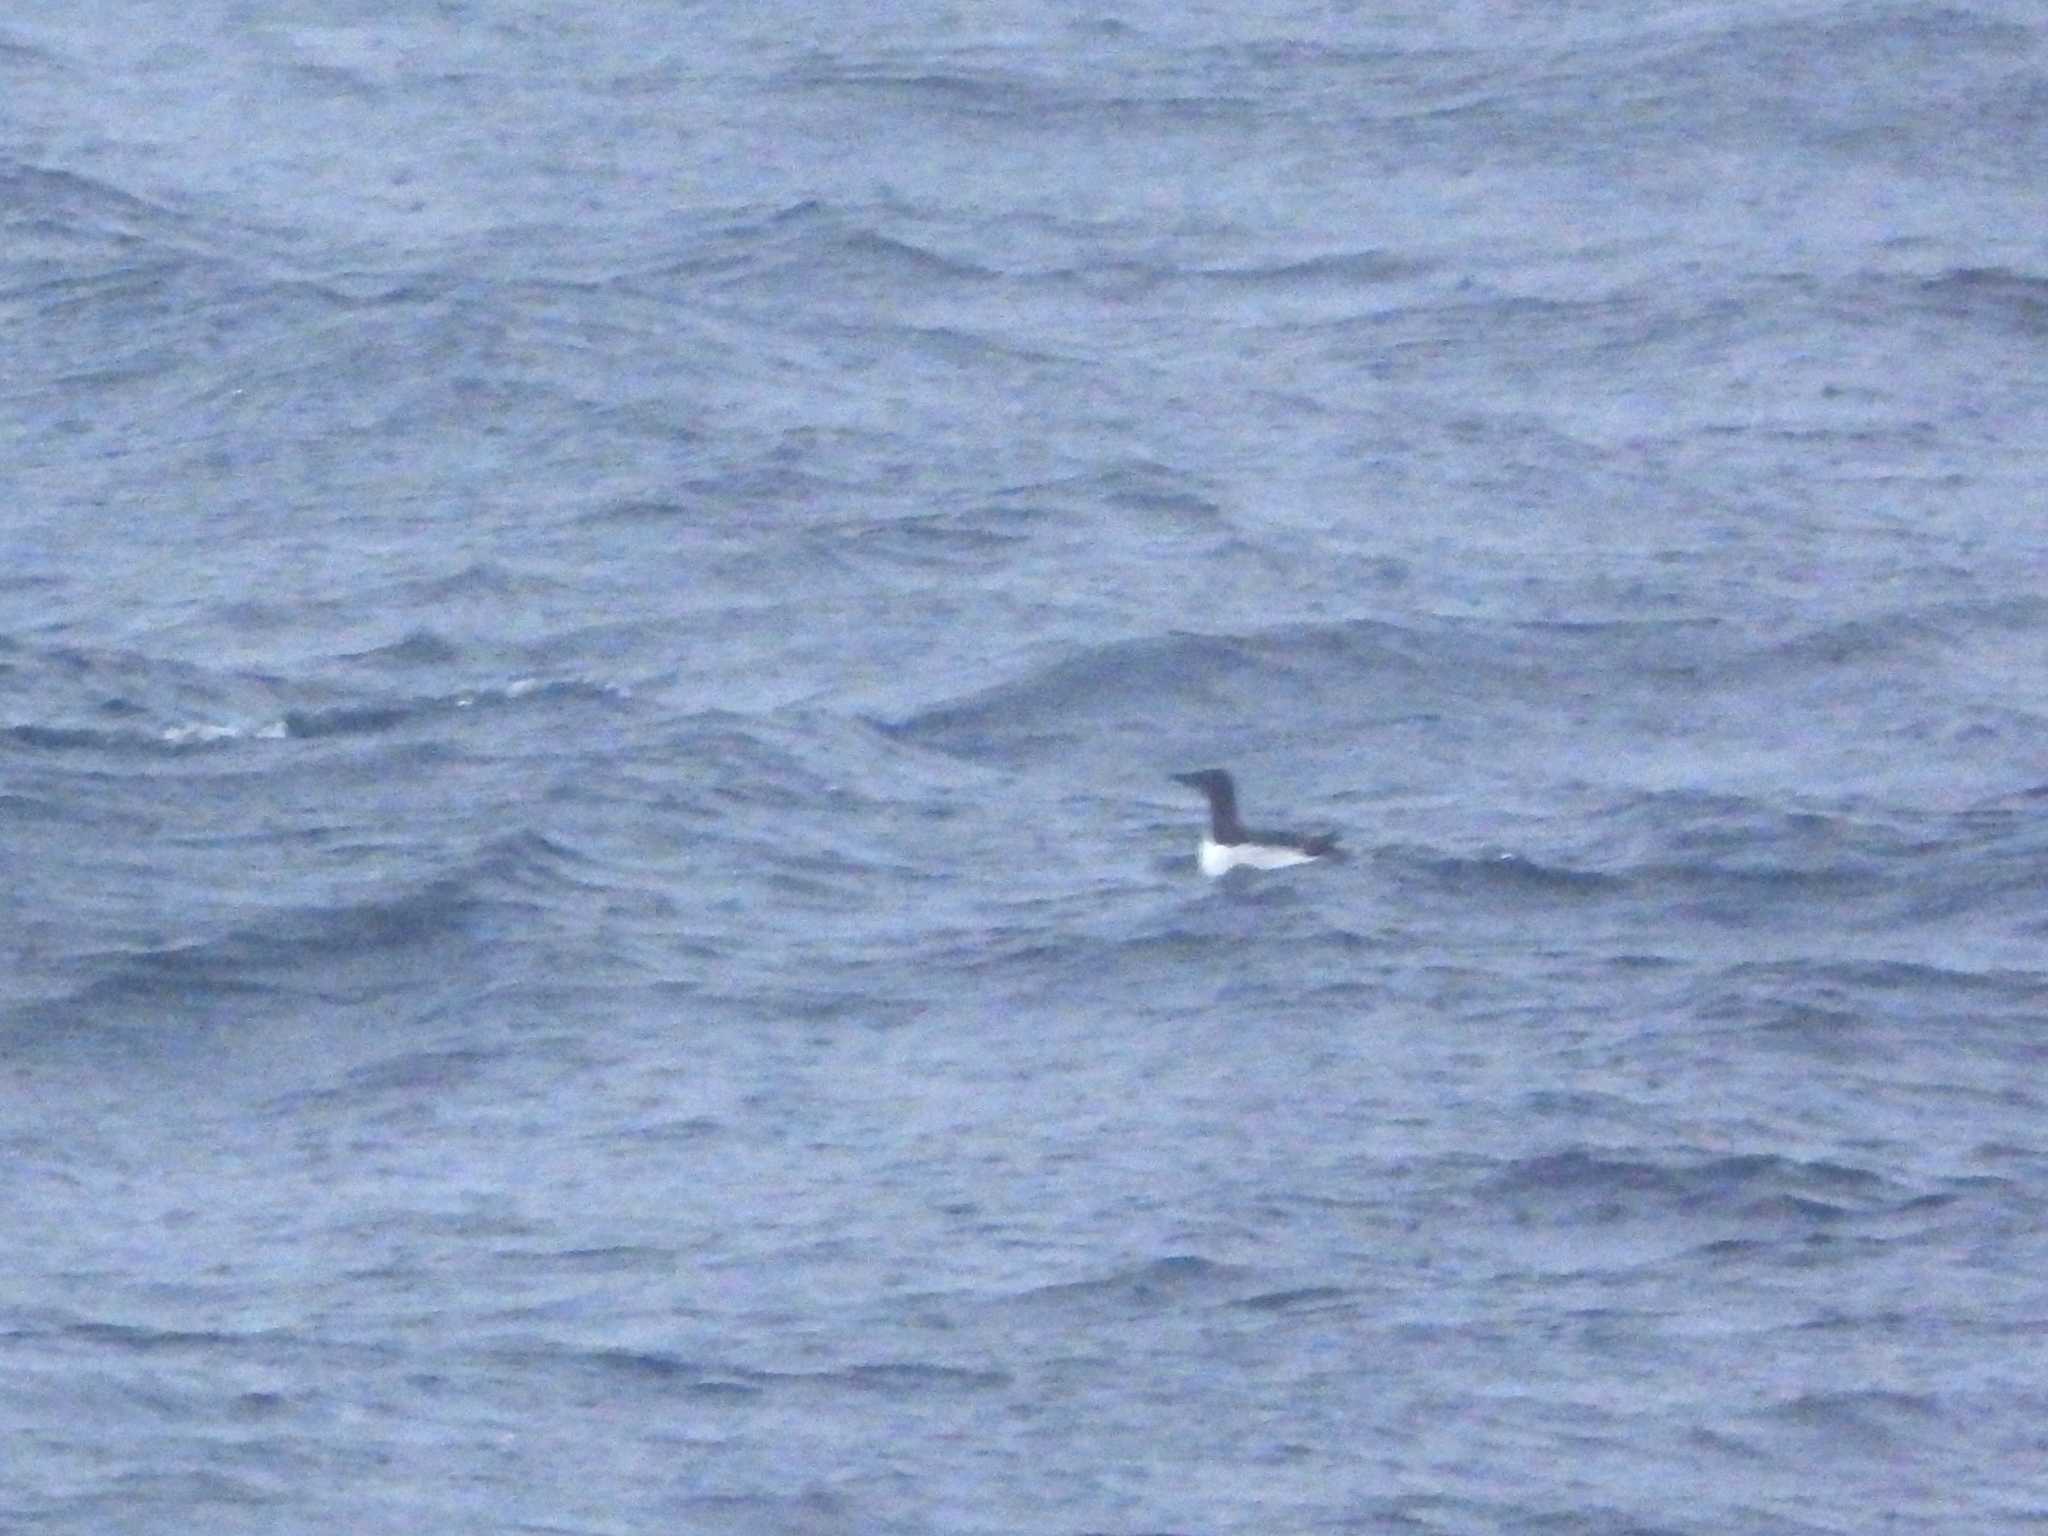 Photo of Thick-billed Murre at 大洗-苫小牧航路 by 𝕲𝖗𝖊𝖞 𝕳𝖊𝖗𝖔𝖓